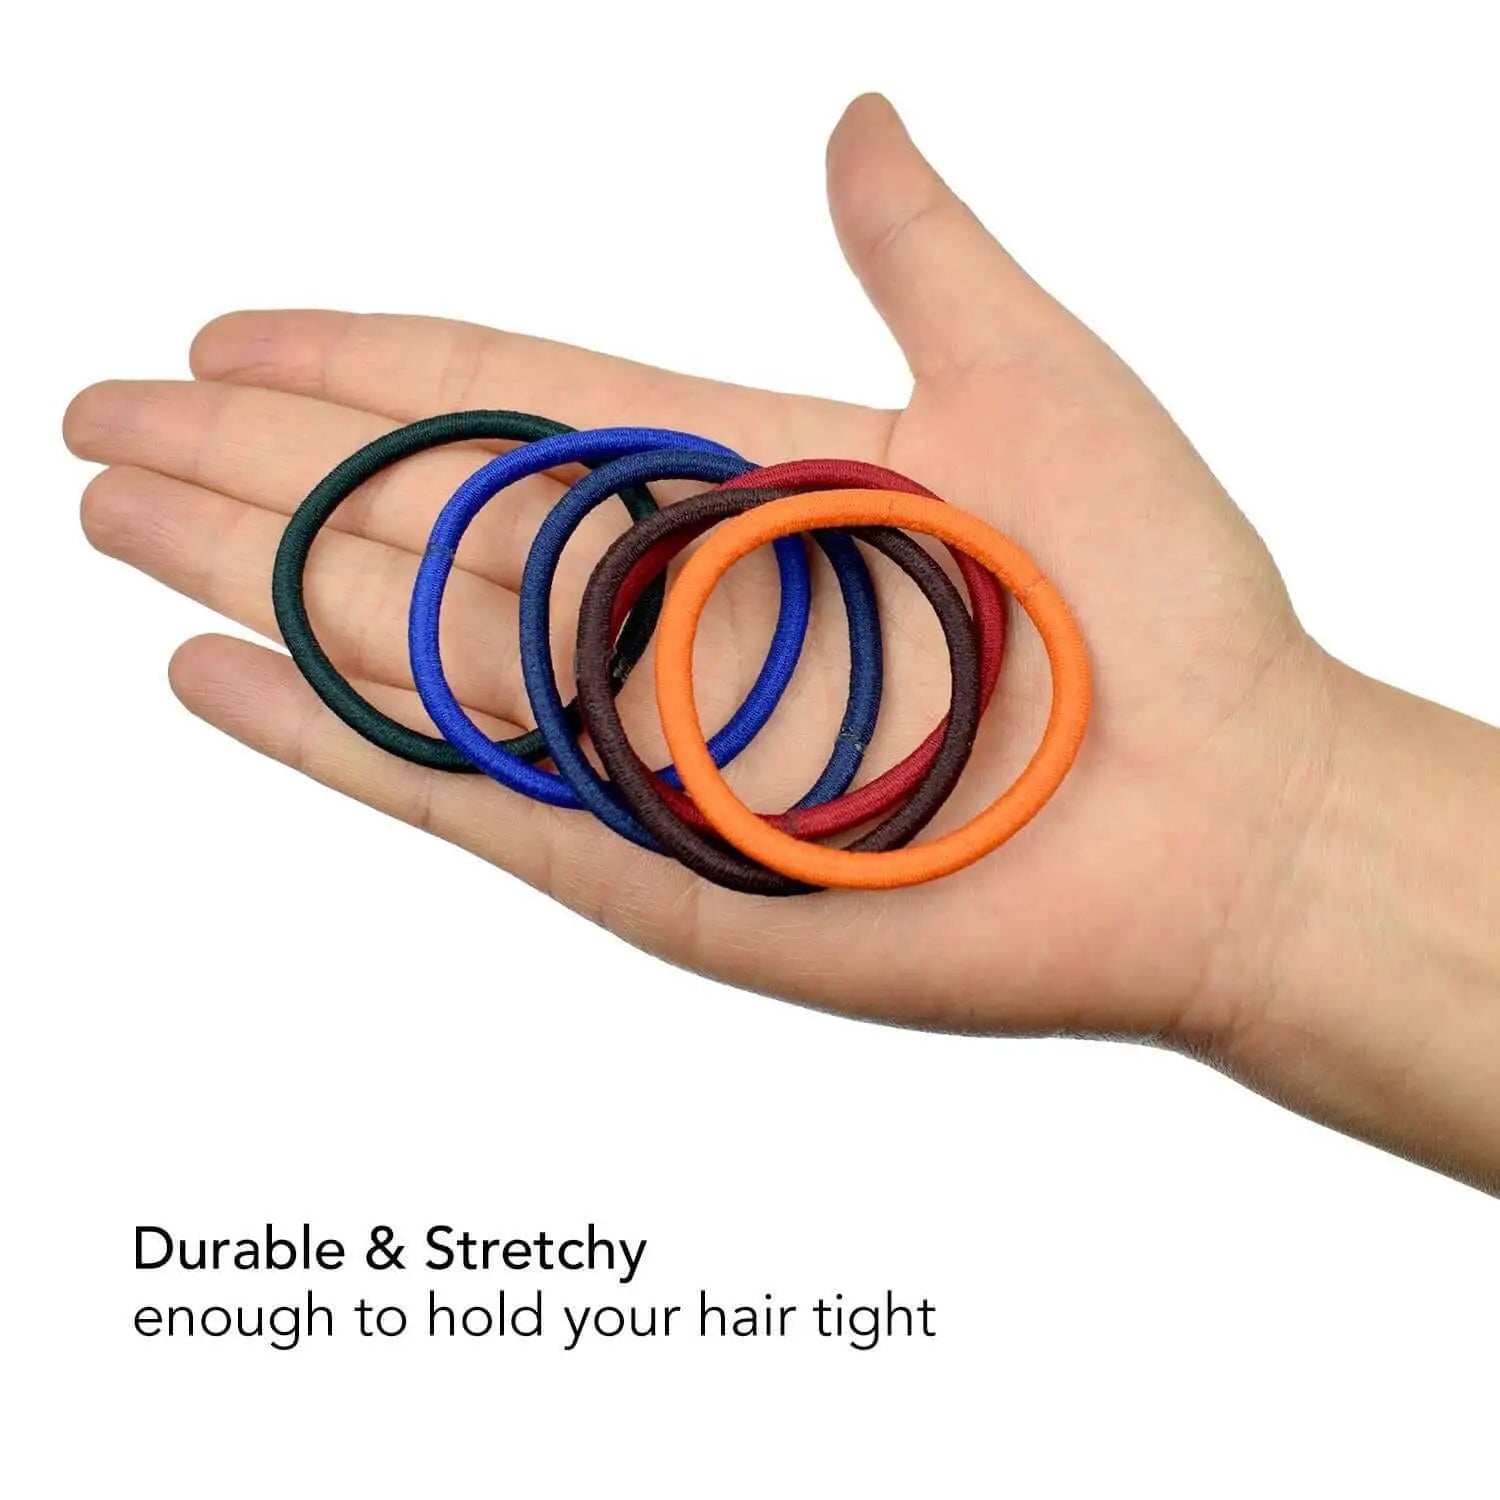 Colorful rubber hair ties in a hand, part of 3mm Soft Elastic Hair Ties, 60 Pieces product.